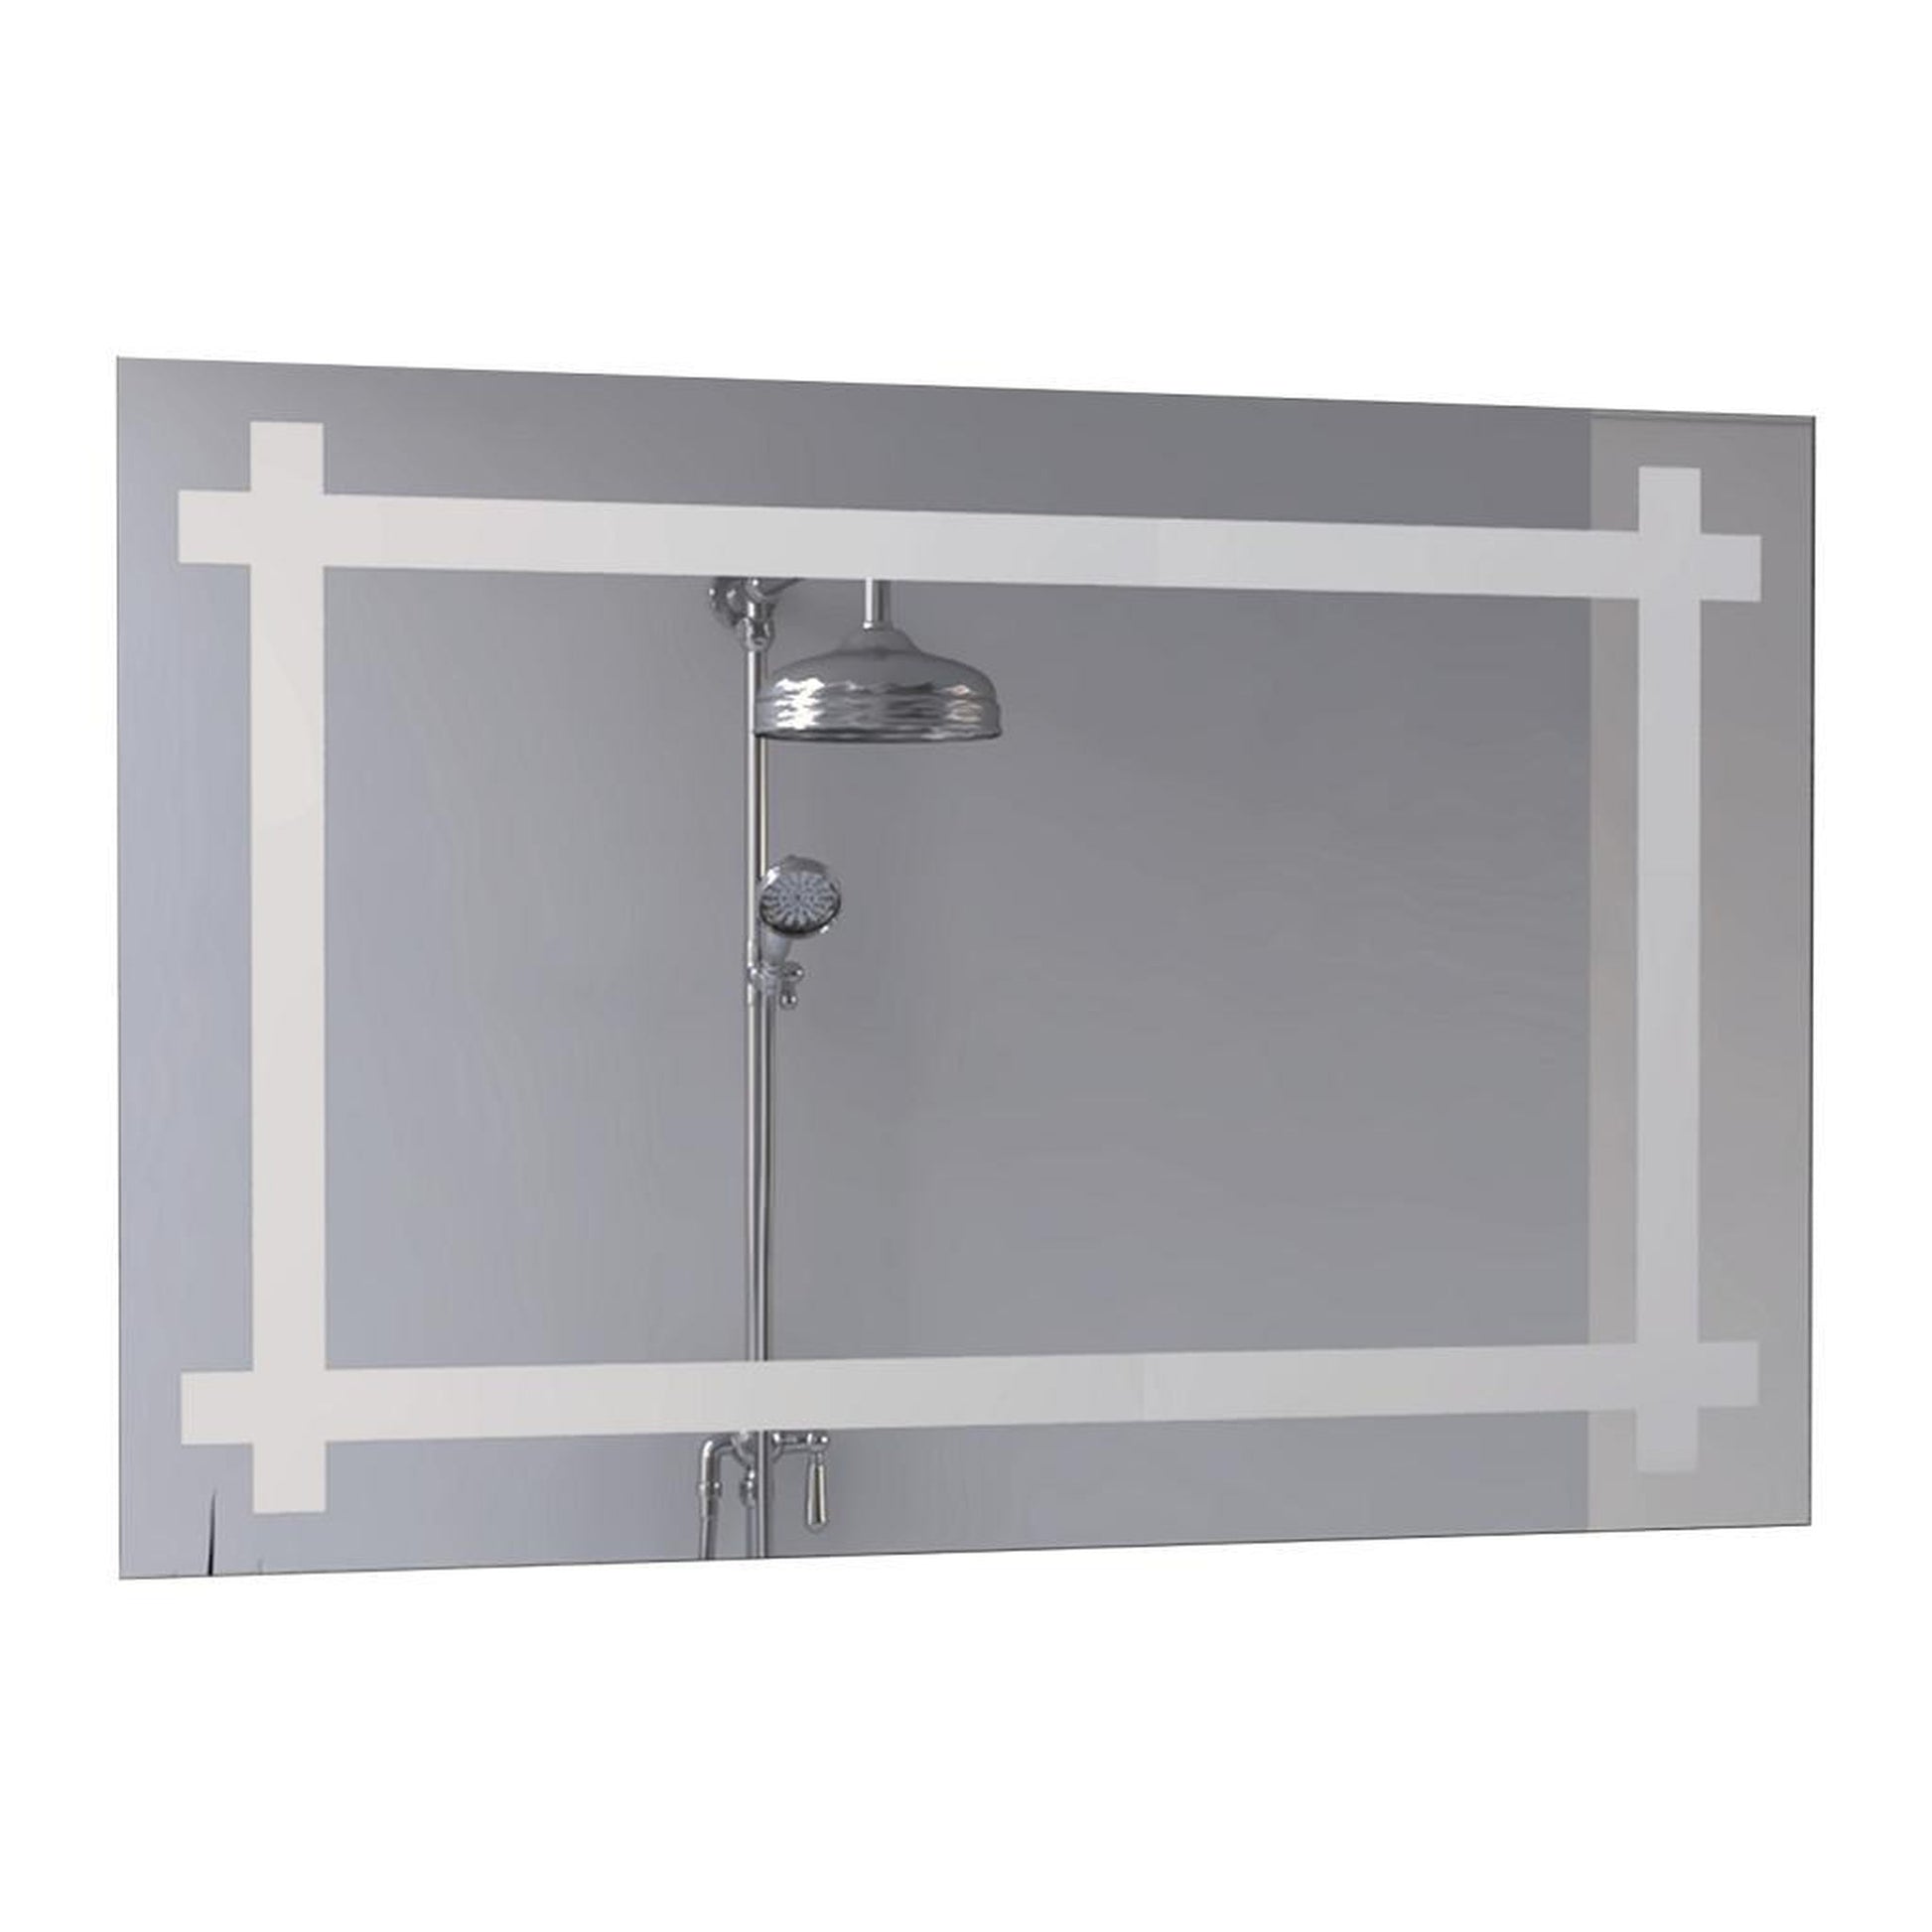 TUHOME Flektar Broni 35" x 24" Frameless Wall-Mounted Mirror With Interior Frosted Frame Design